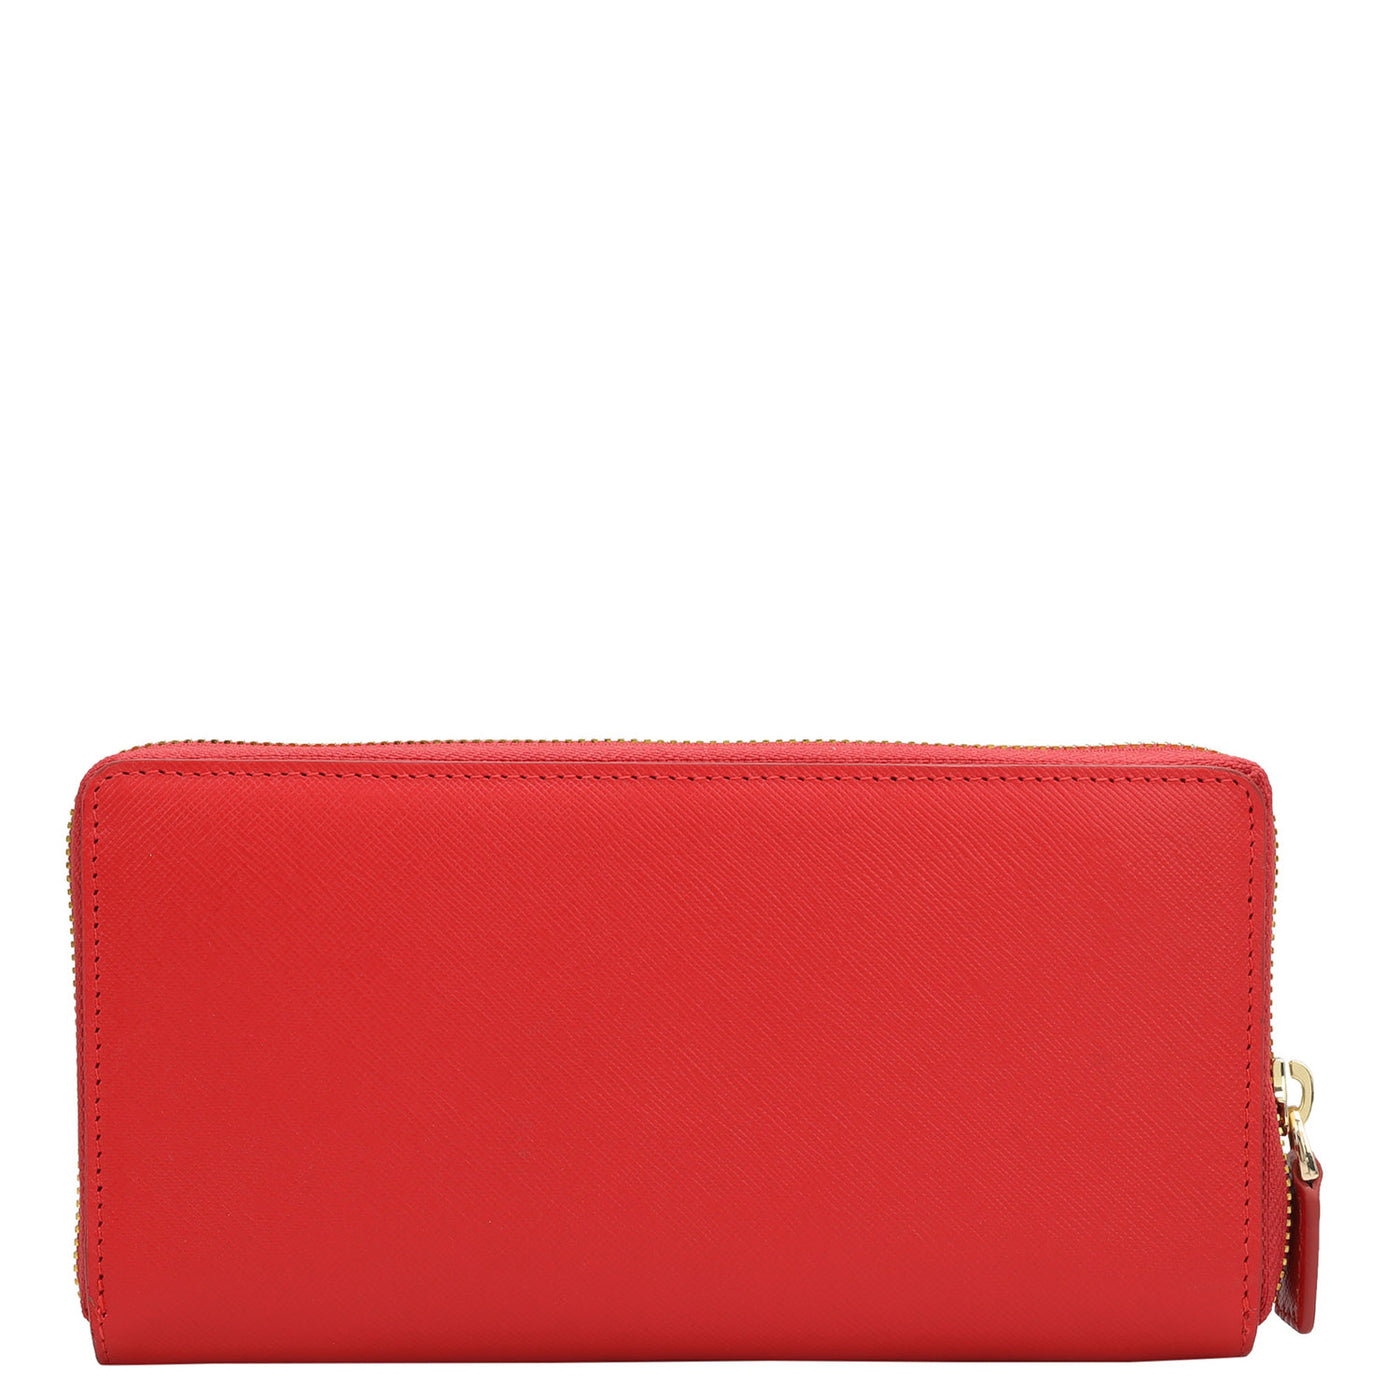 Saffiano Leather Ladies Wallet - Red